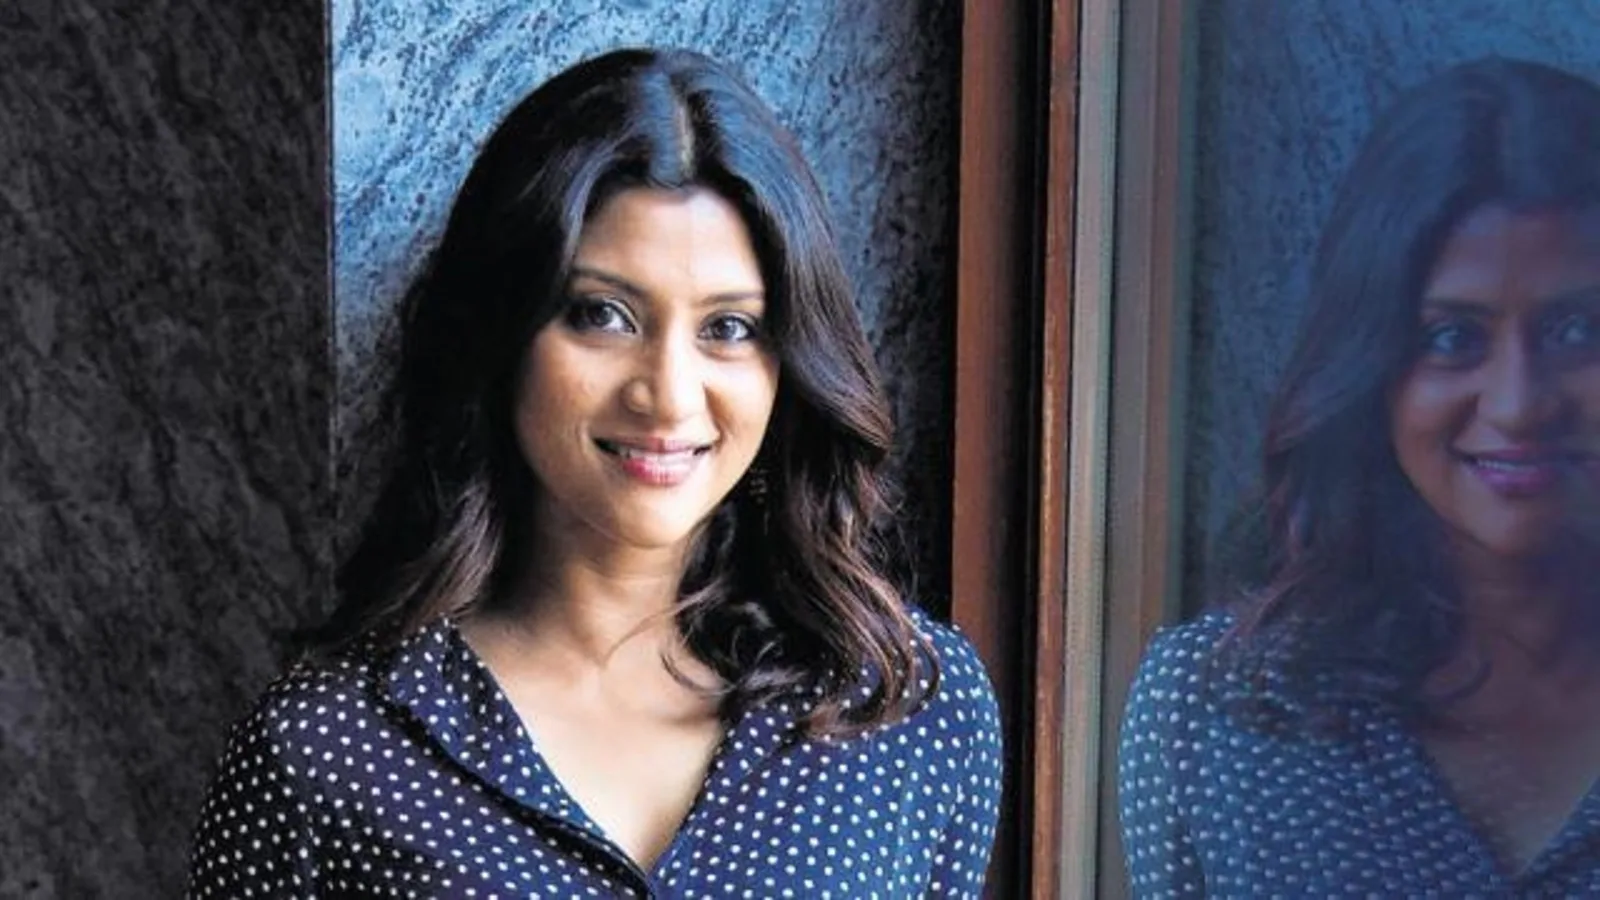 Konkona Sen Sharma says she doesn’t relate to concept of gender: ‘I don’t view myself as a woman’